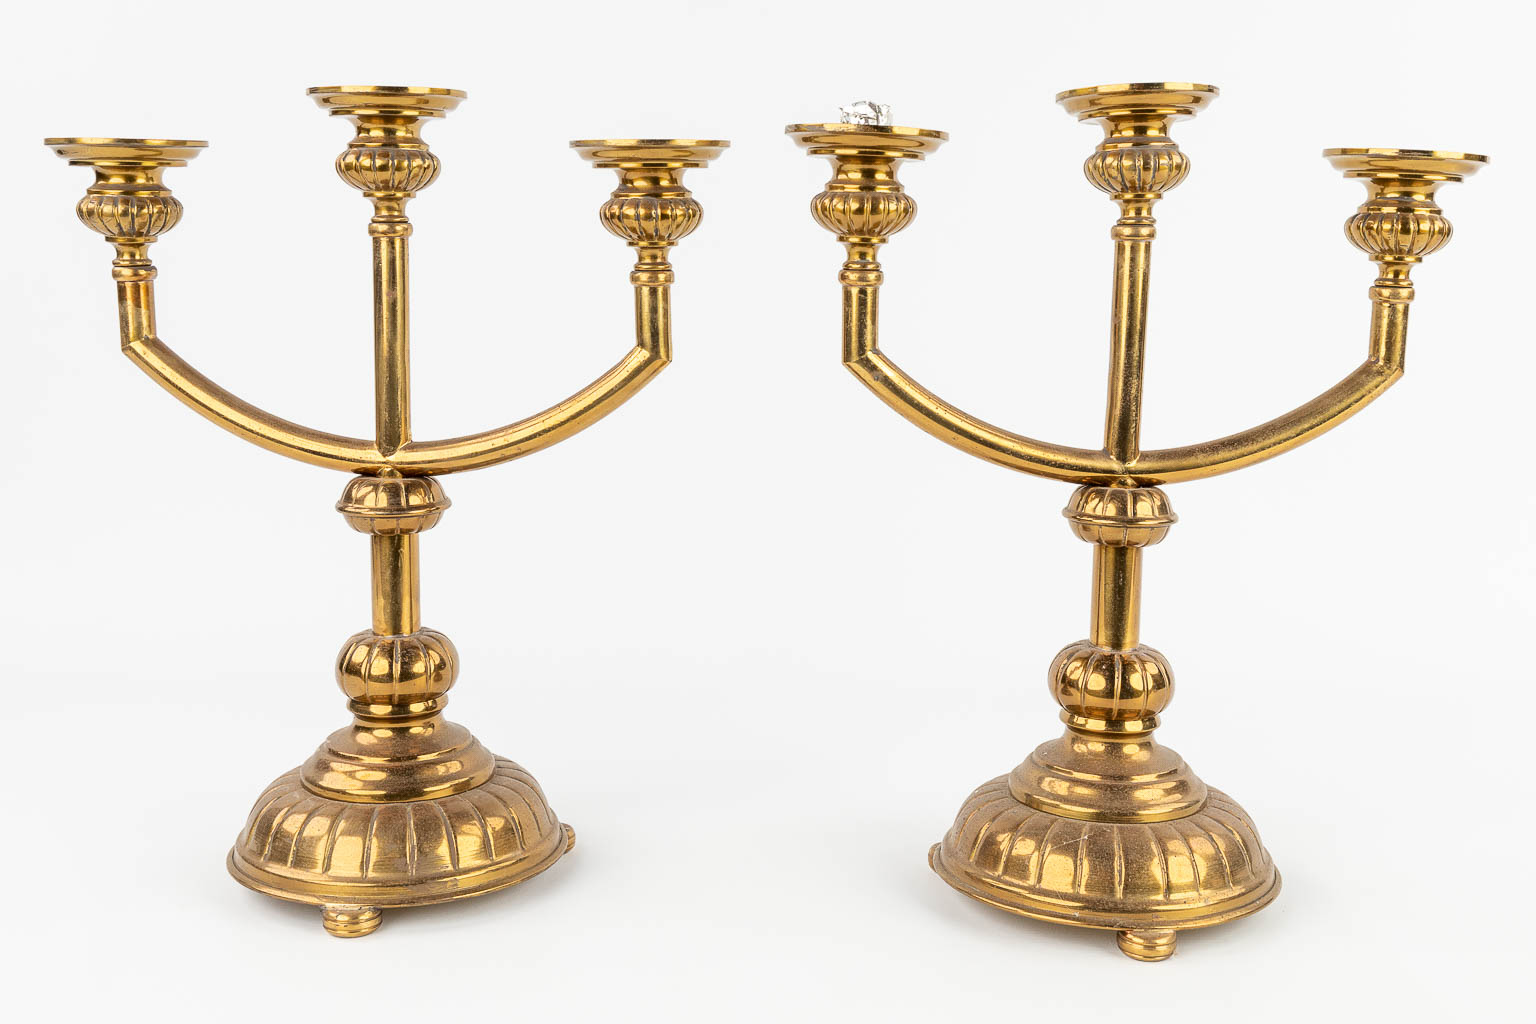 A pair of candlesticks and a procession lamp. 20th century. (H: 36 cm) - Image 11 of 16